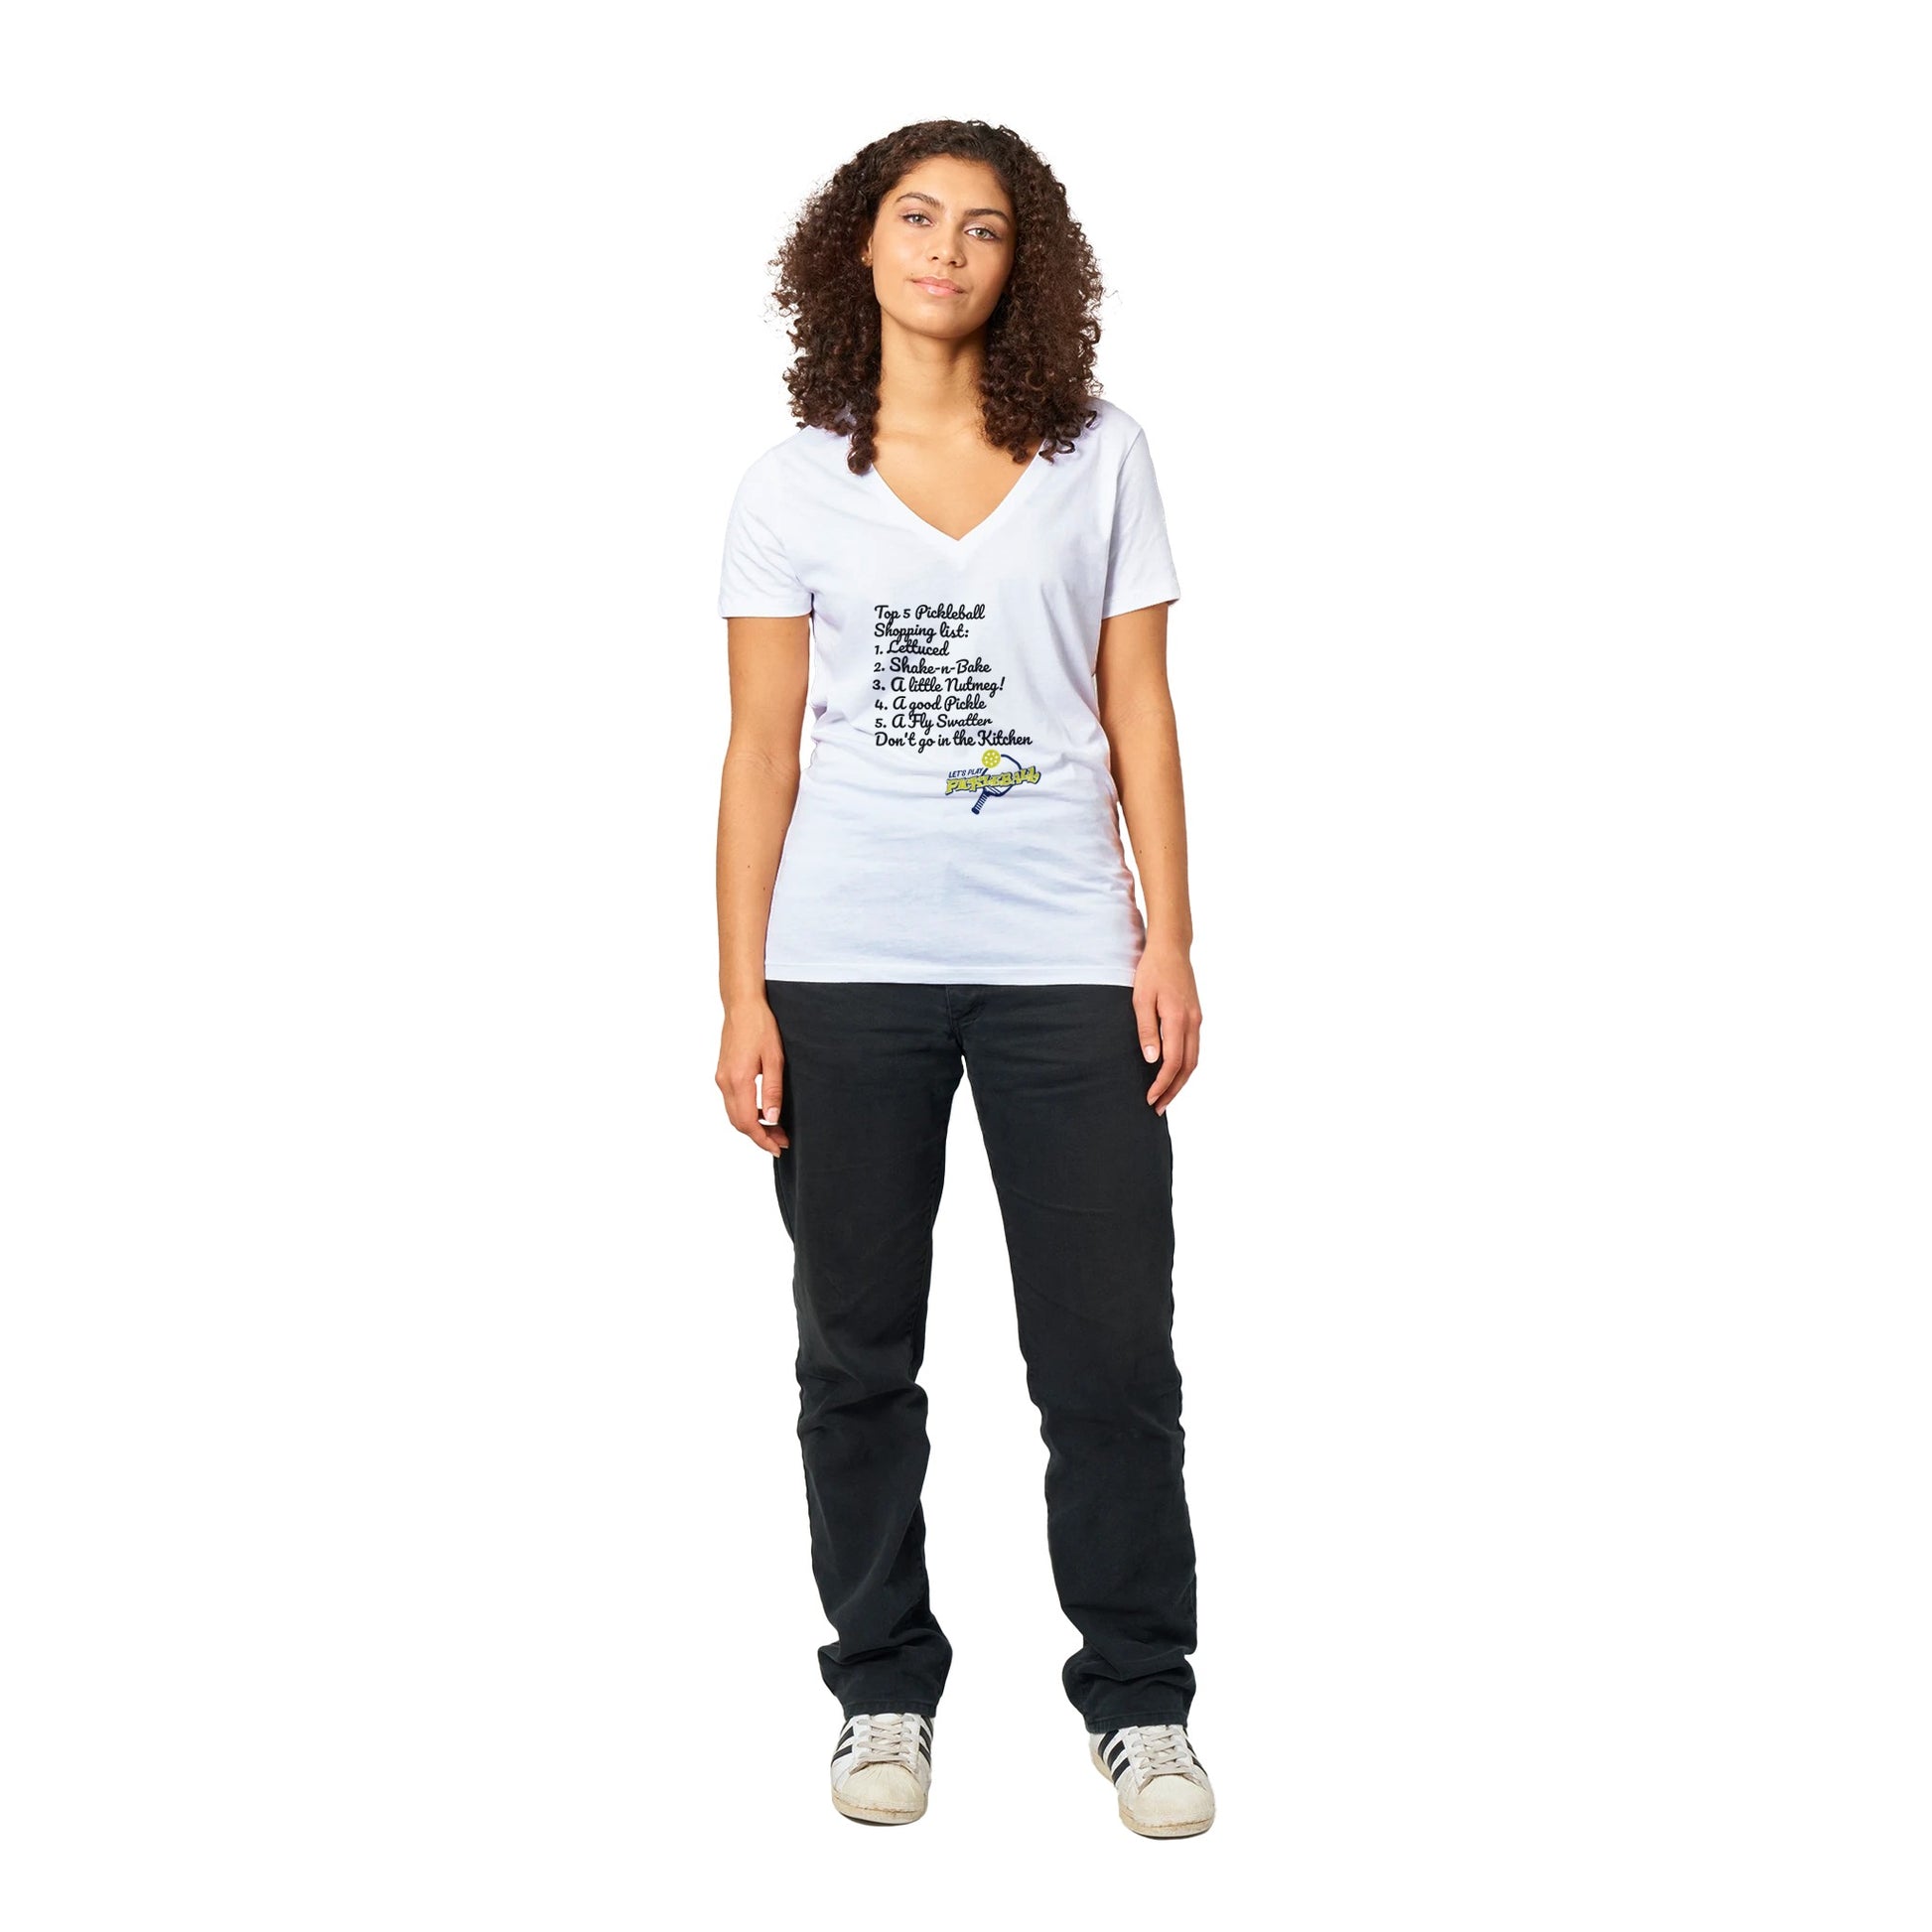 Dark-haired female model wearing original motto Top 5 PickleBall list premium women’s V-neck t-shirt from WhatYa Say Apparel made from combed and ring-spun cotton standing.